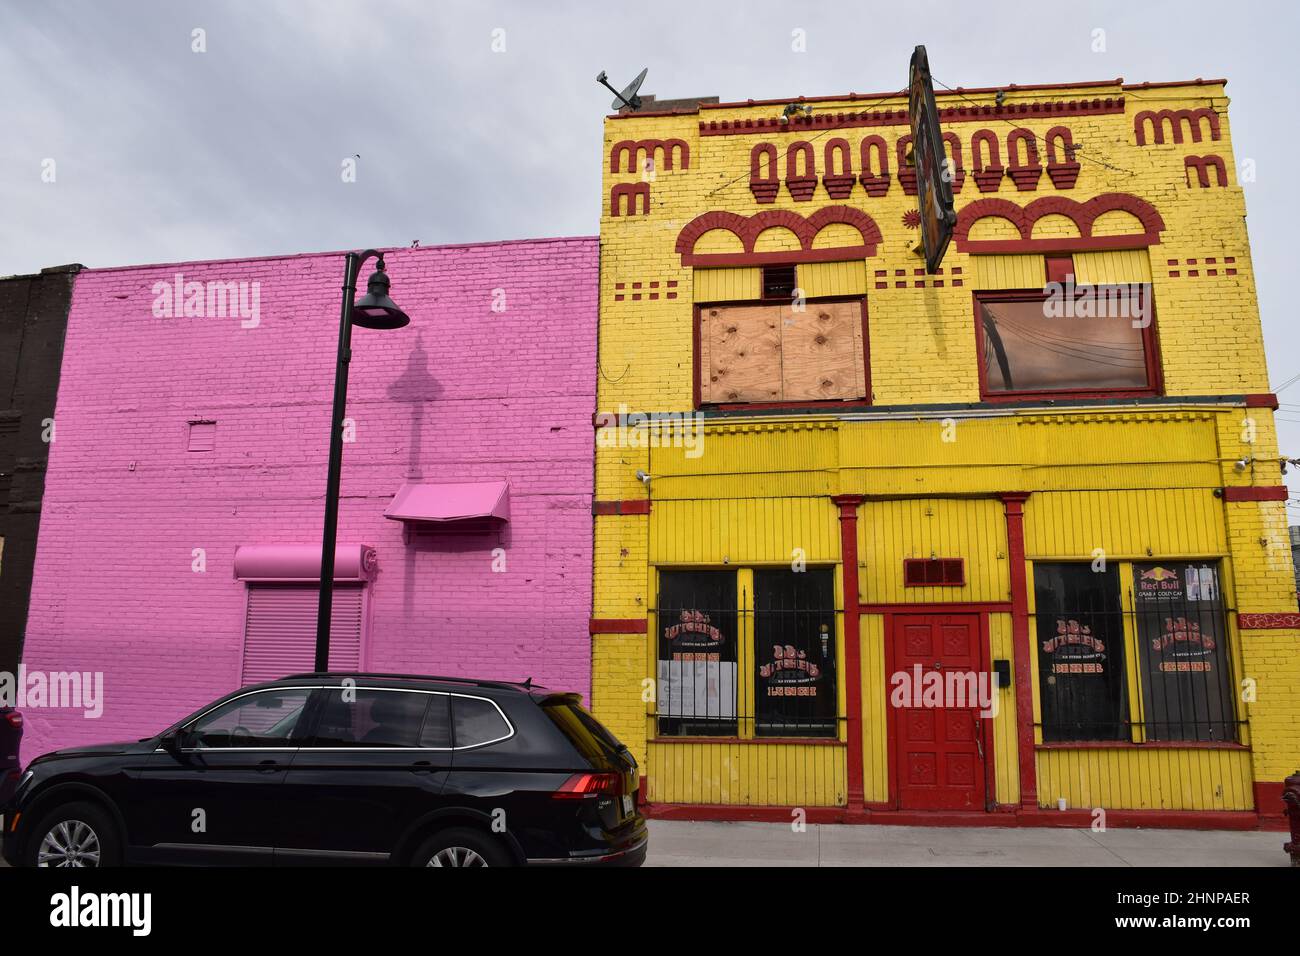 Colorful facades on Winder St and in yellow the now permanently closed Butcher's Inn pub in the Eastern Market area of Detroit, Michigan, USA. Stock Photo